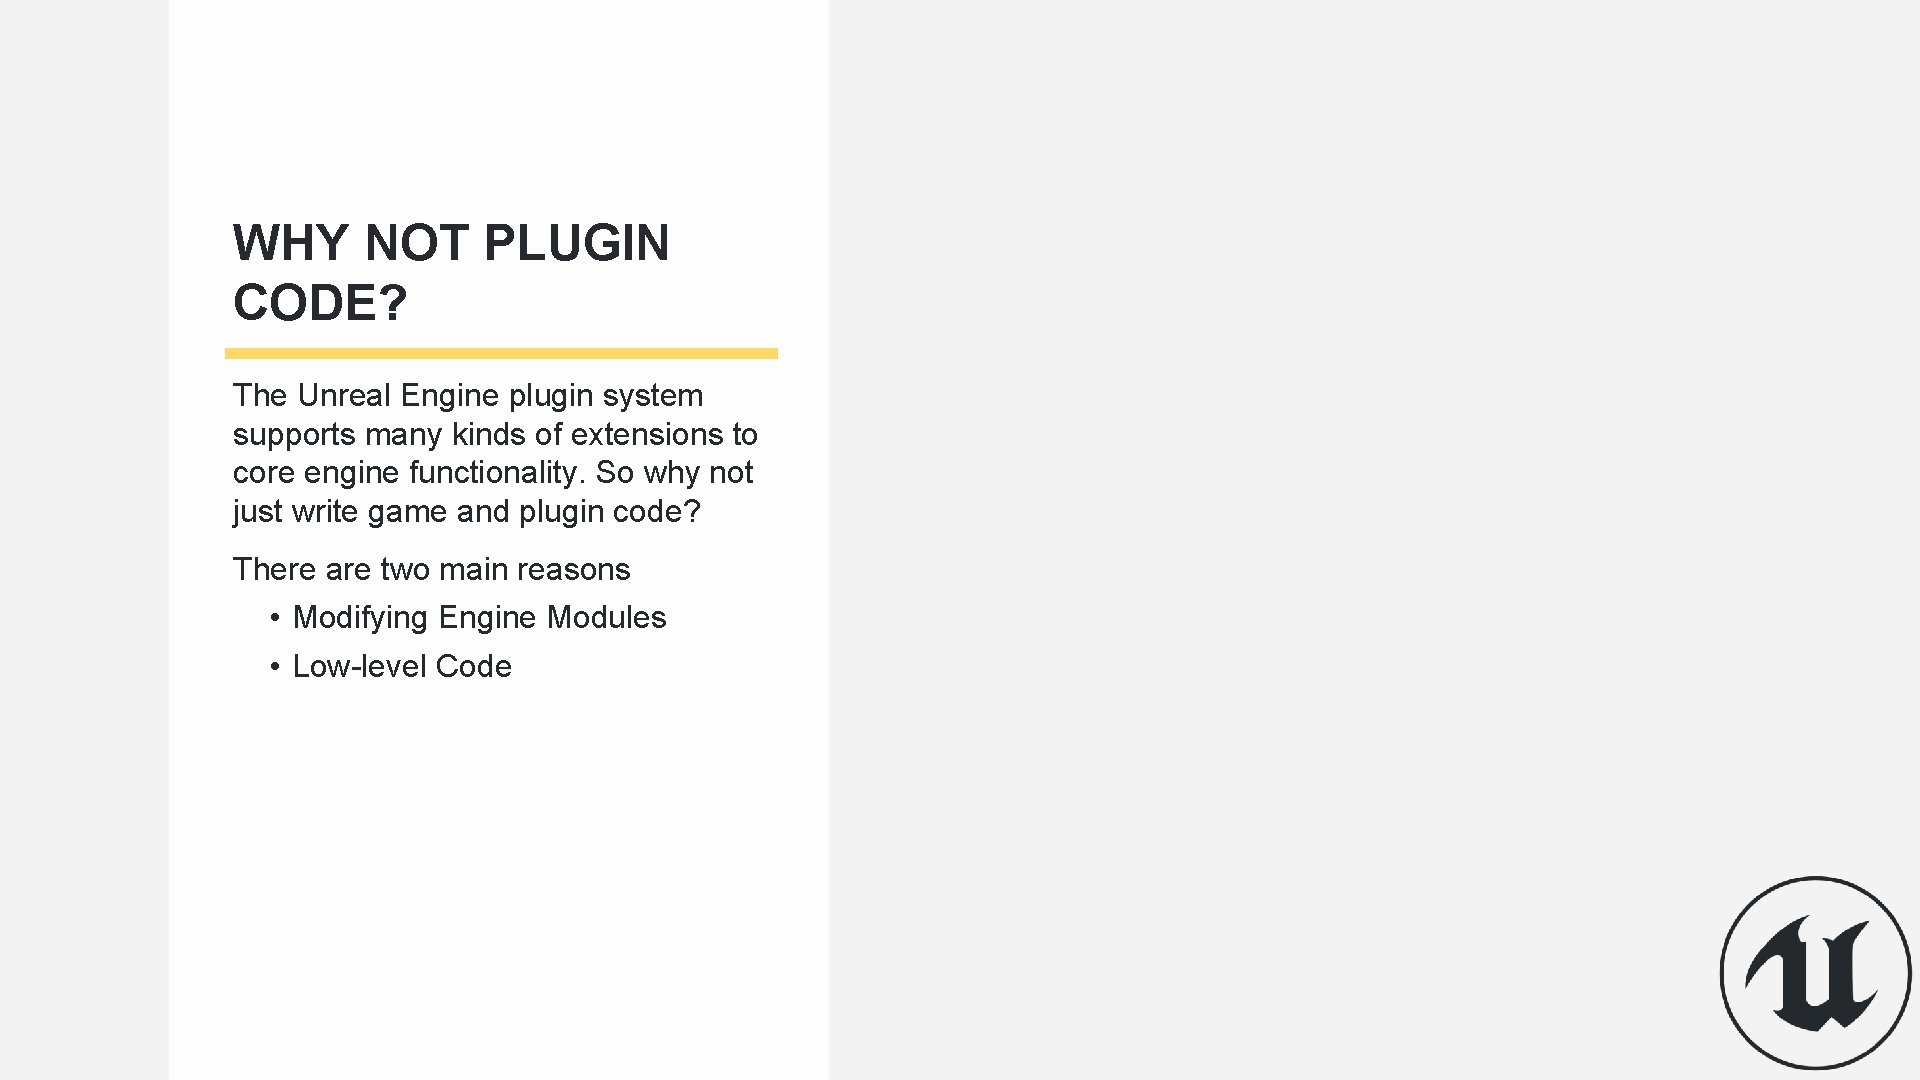 WHY NOT PLUGIN CODE? The Unreal Engine plugin system supports many kinds of extensions